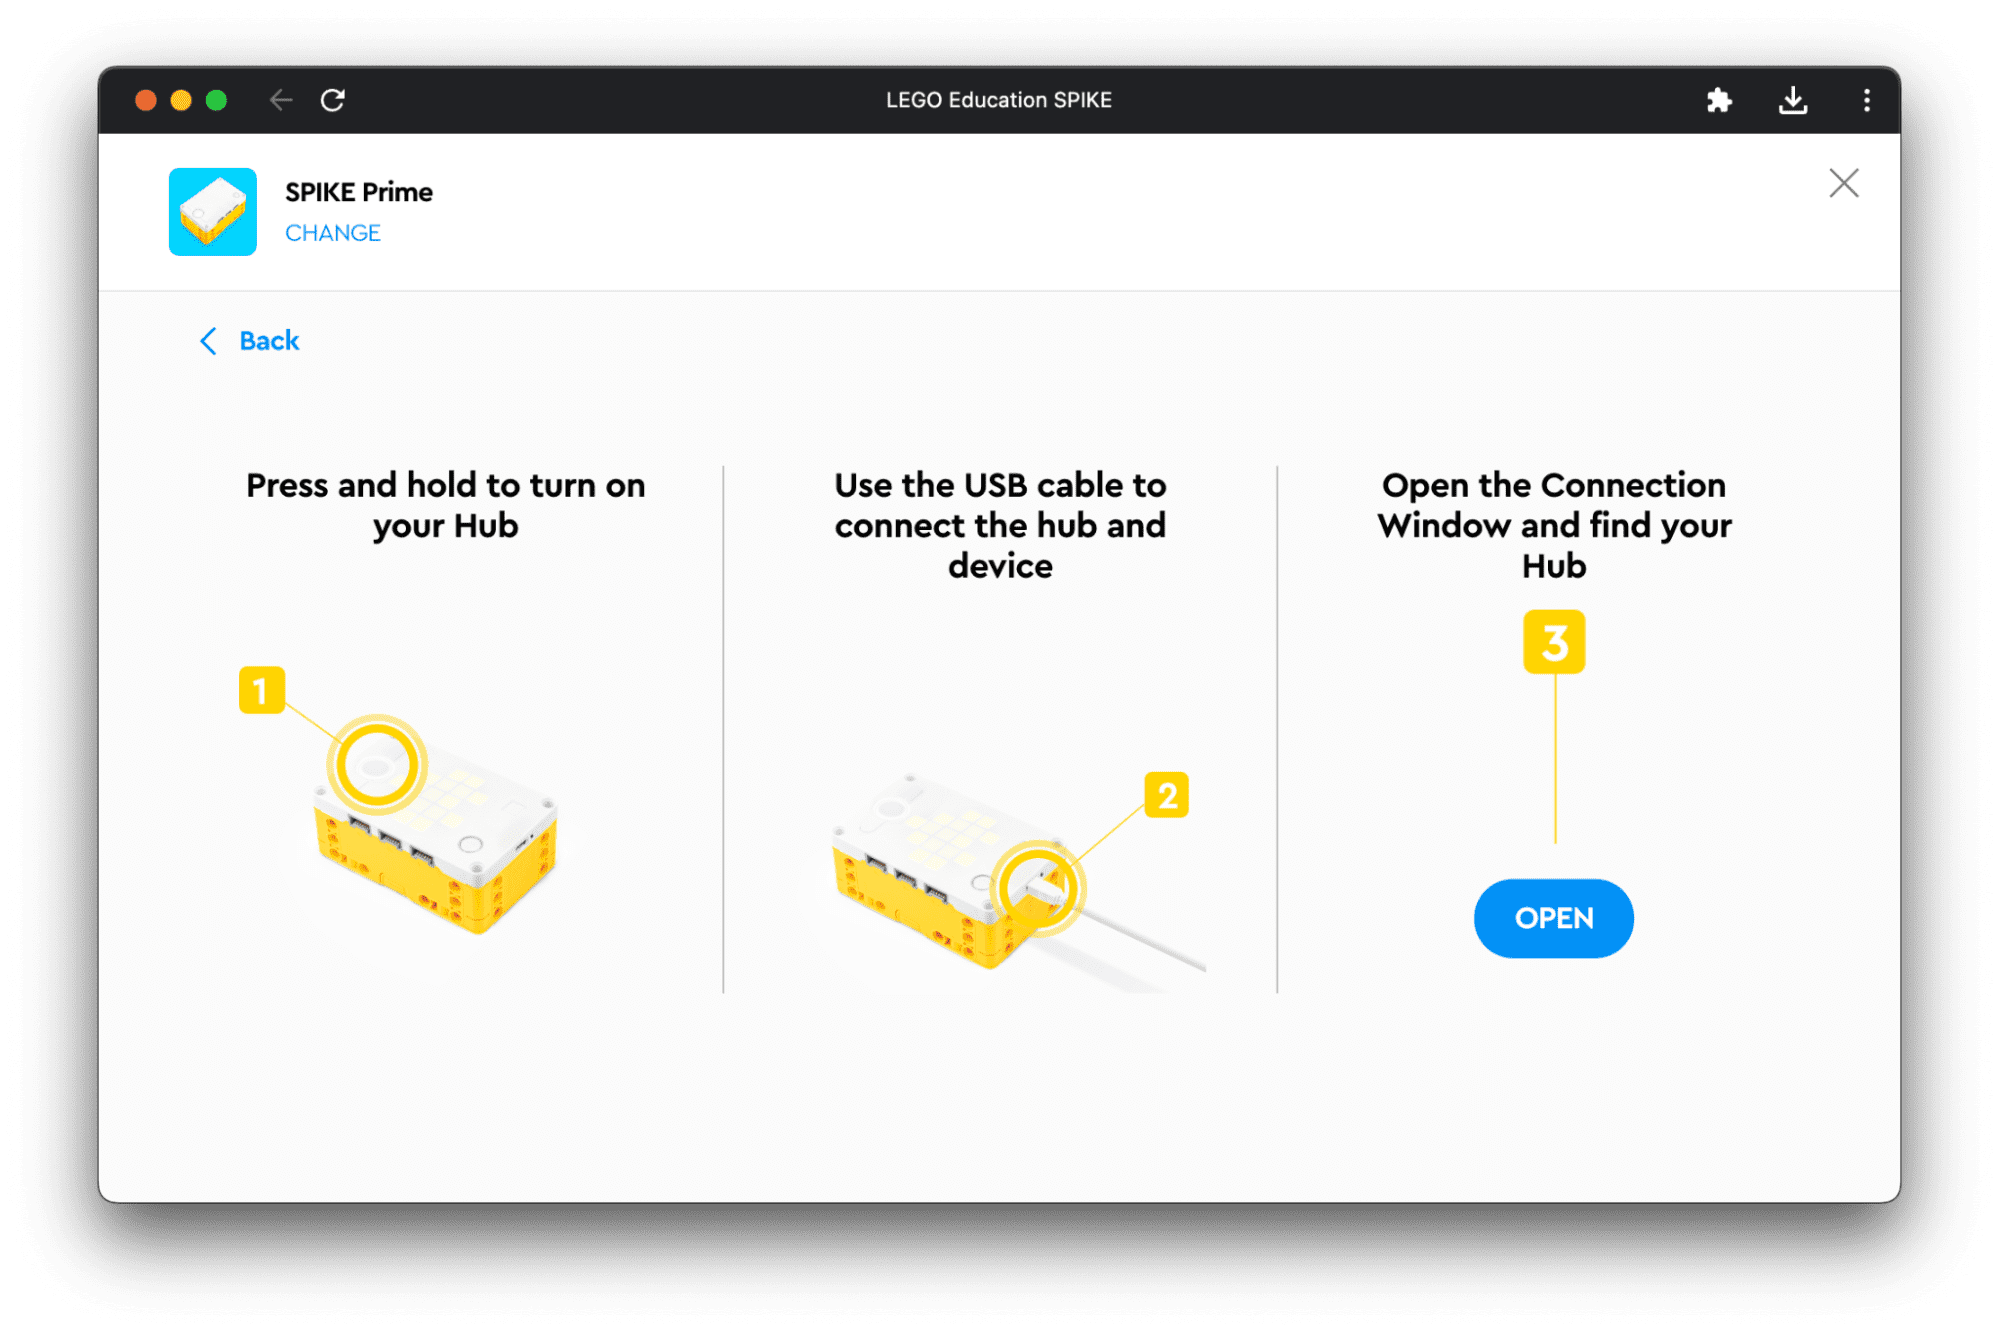 LEGO Education SPIKE app with USB connection instructions.